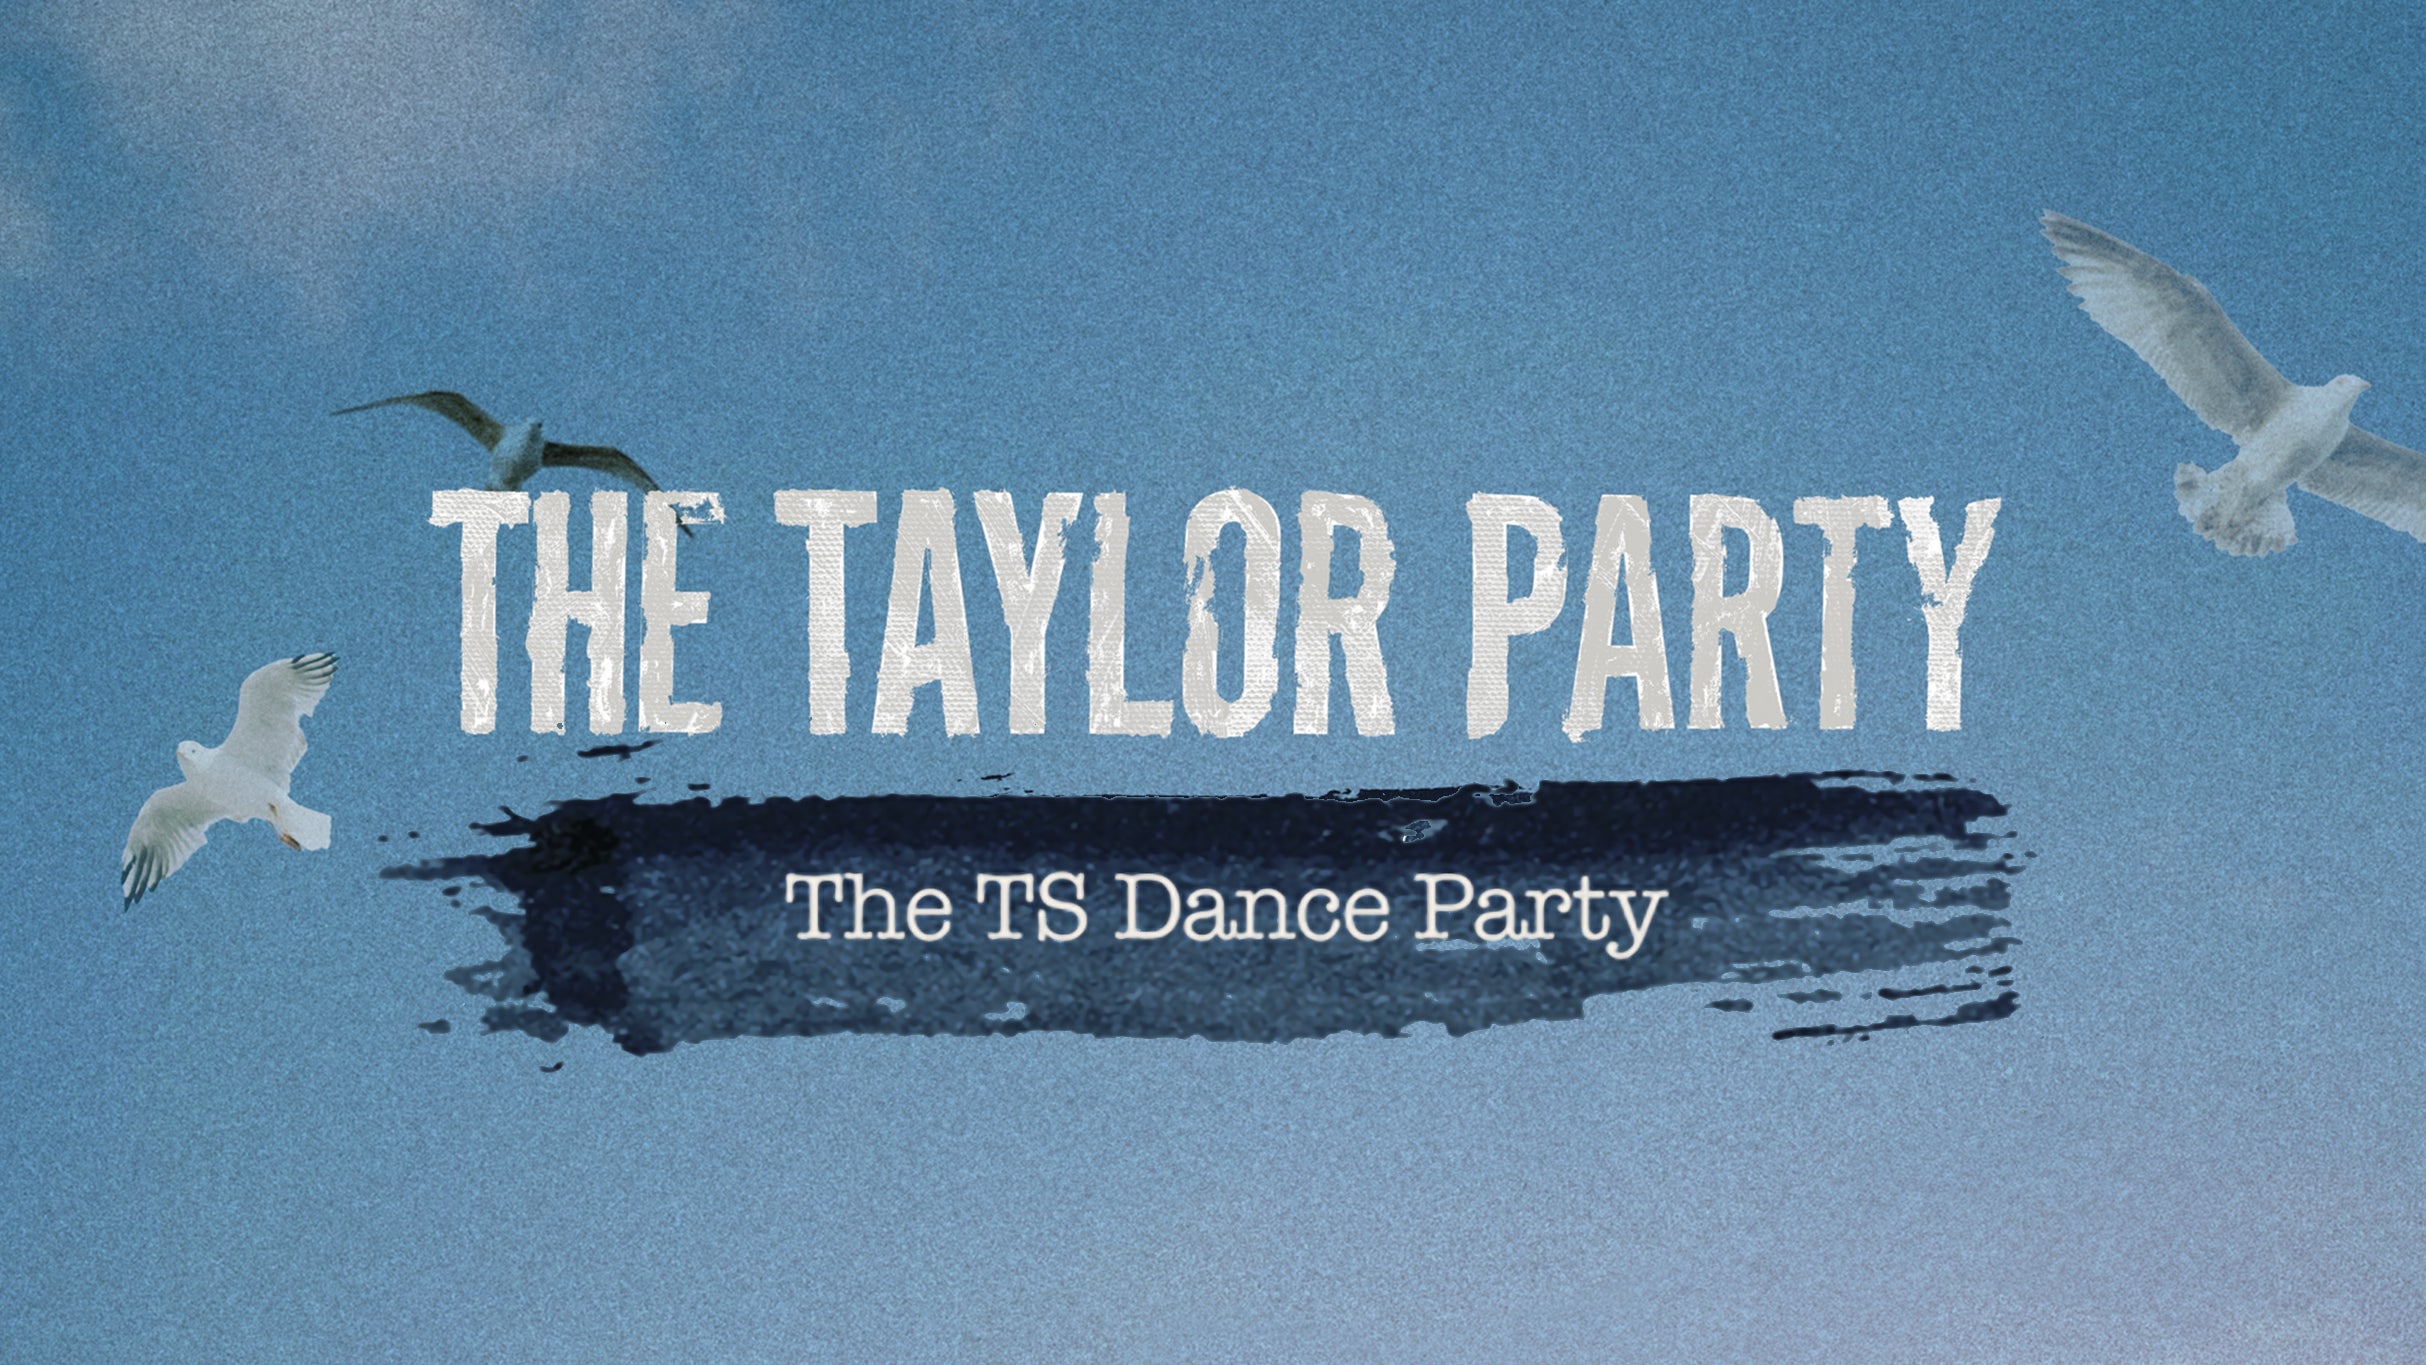 The Taylor Party: The TS Dance Party at 9:30 CLUB - WASHINGTON, DC 20001